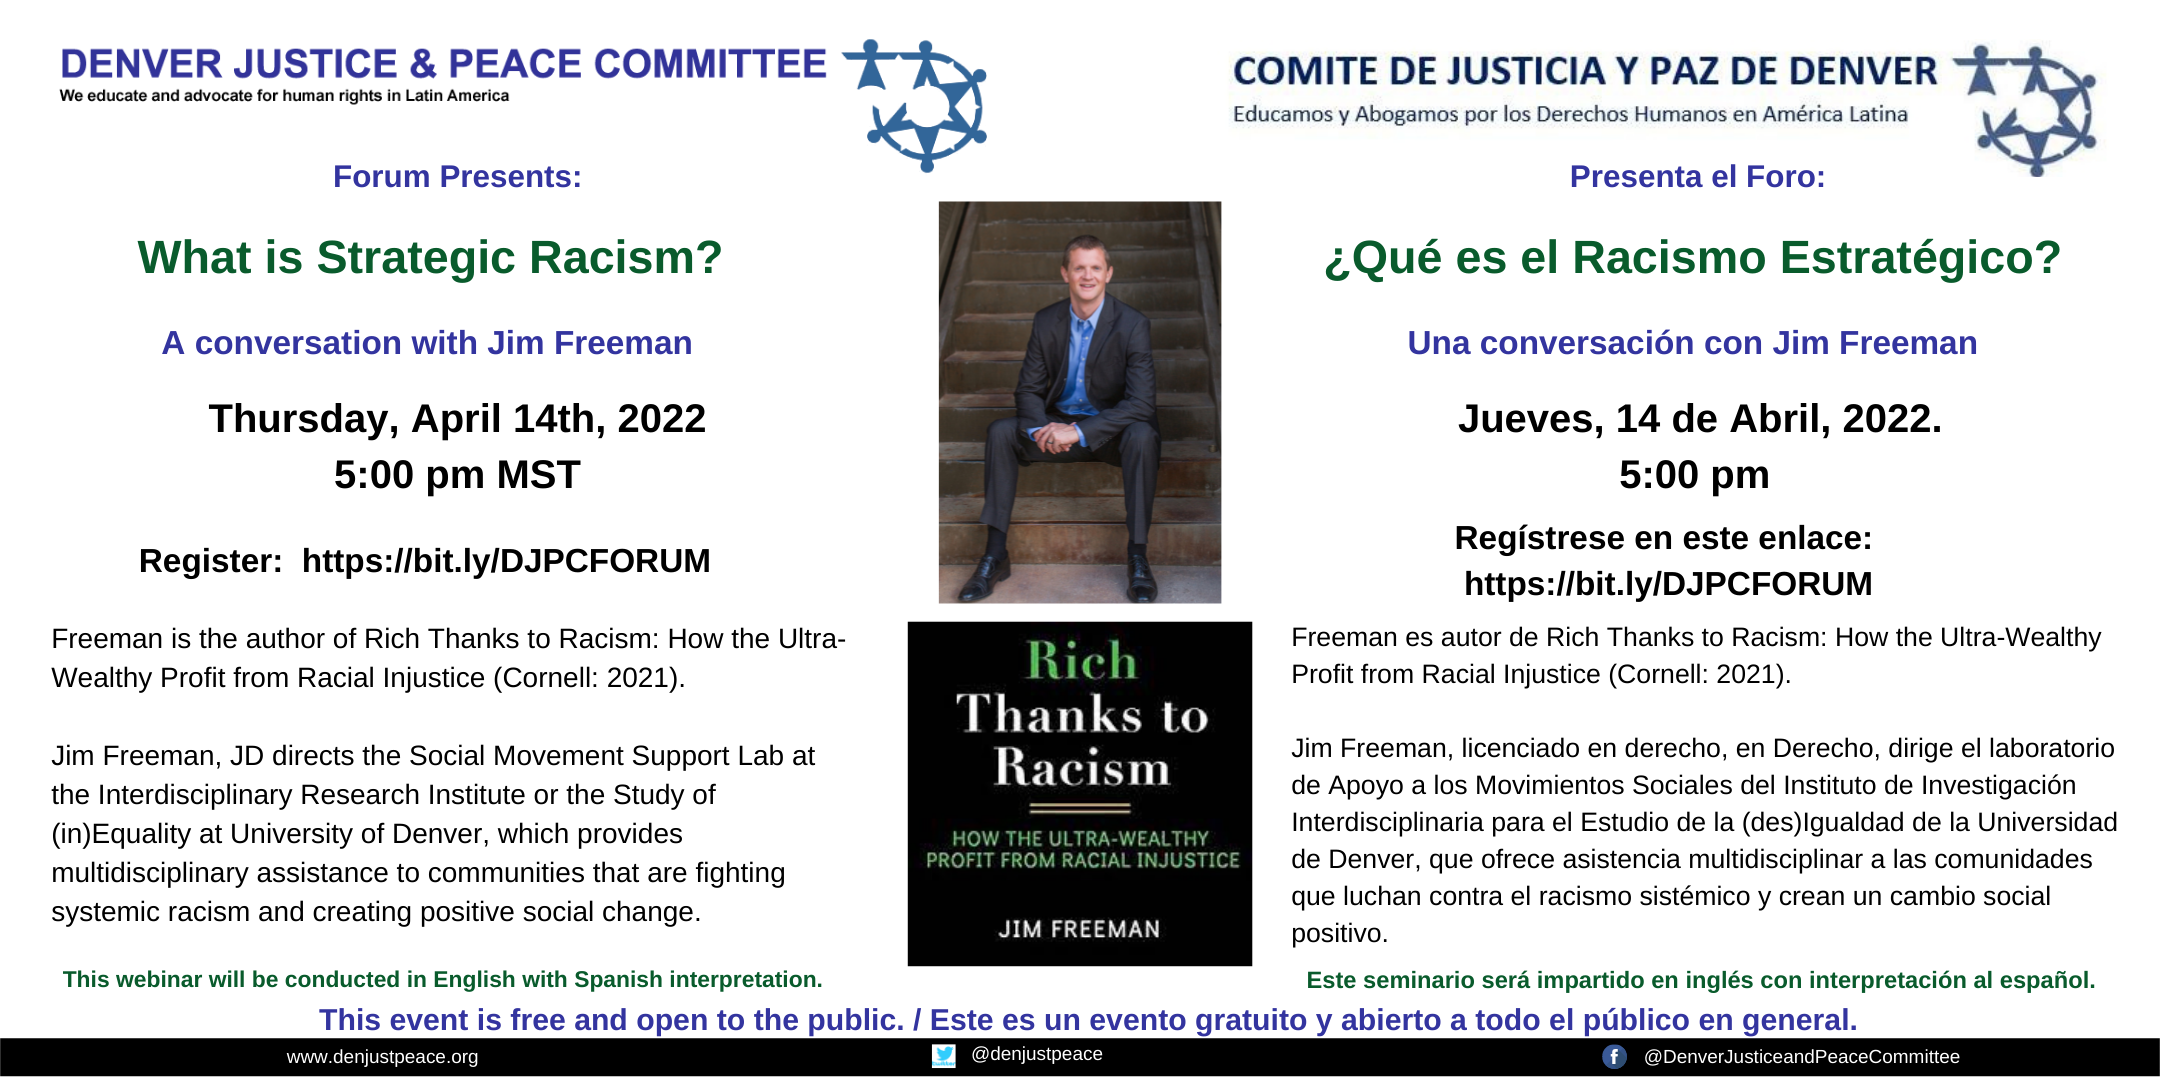 (English) DJPC Forum: What is Strategic Racism? Thursday, April 14th at 5:00 pm.